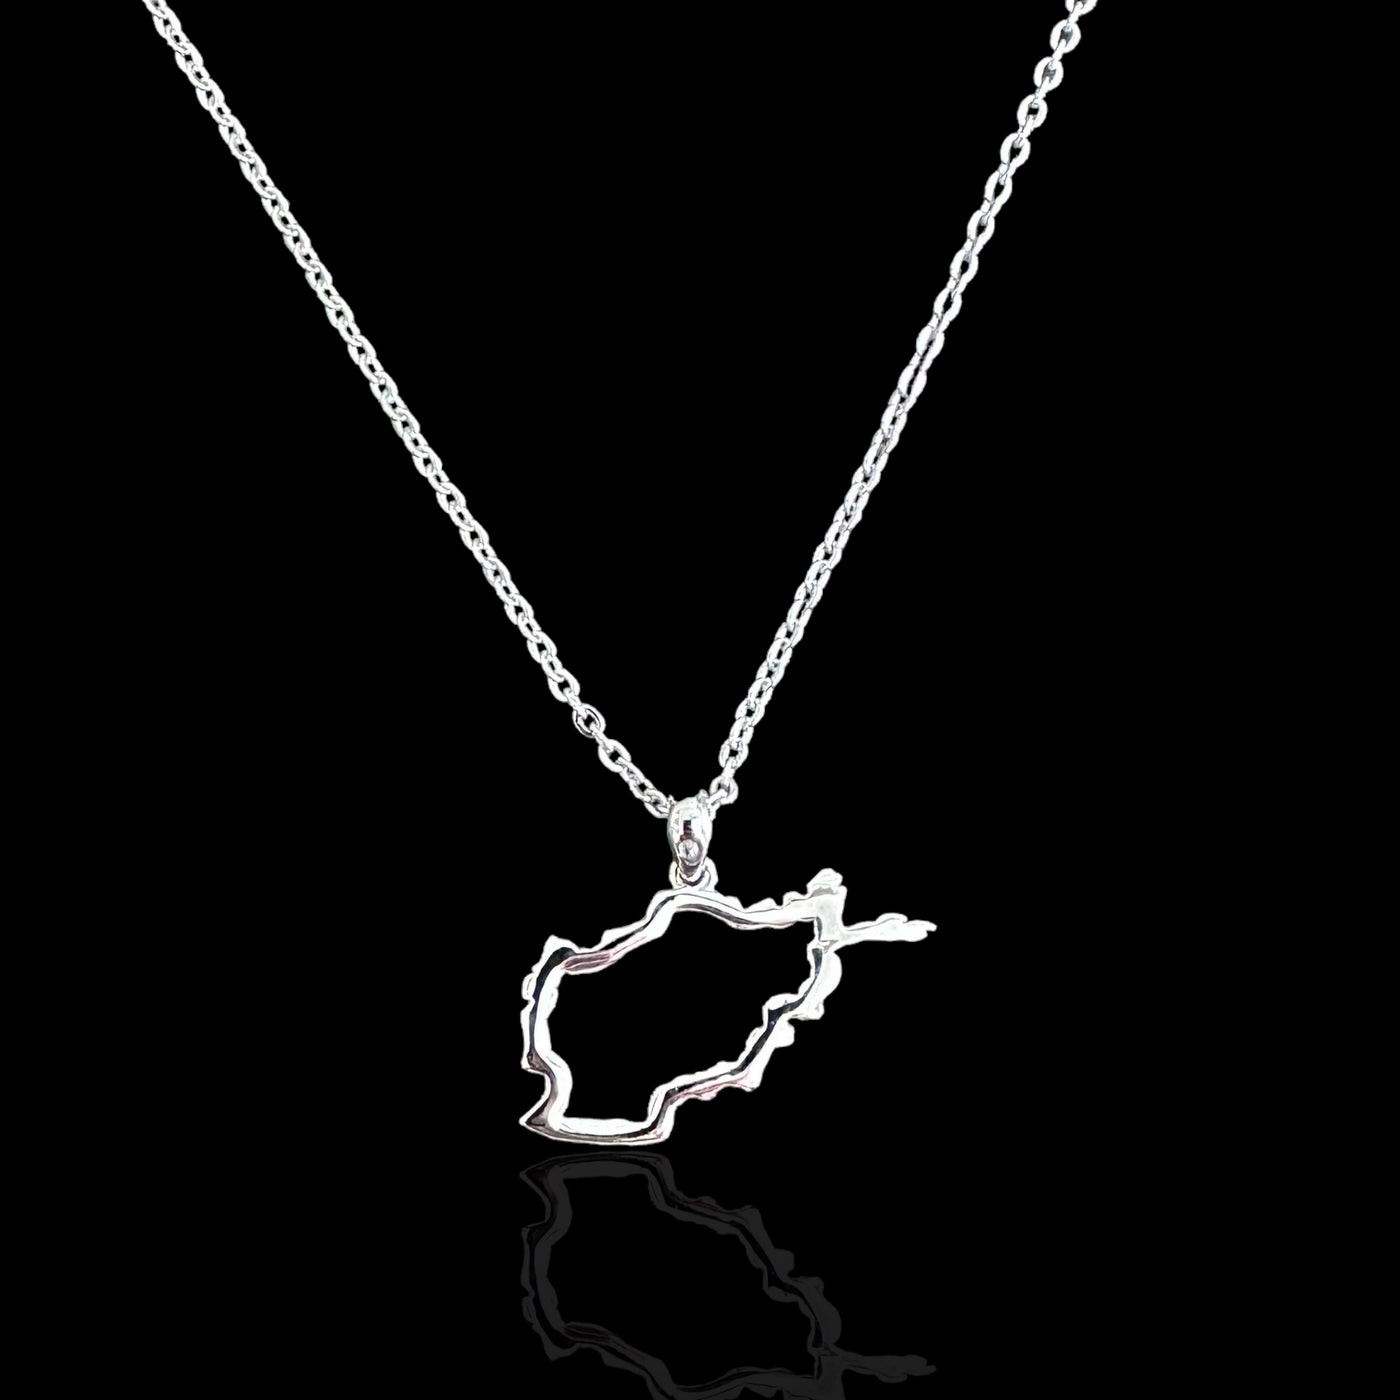 Sterling Silver Afghanistan Map Outline Necklace - Available in 3 Colors